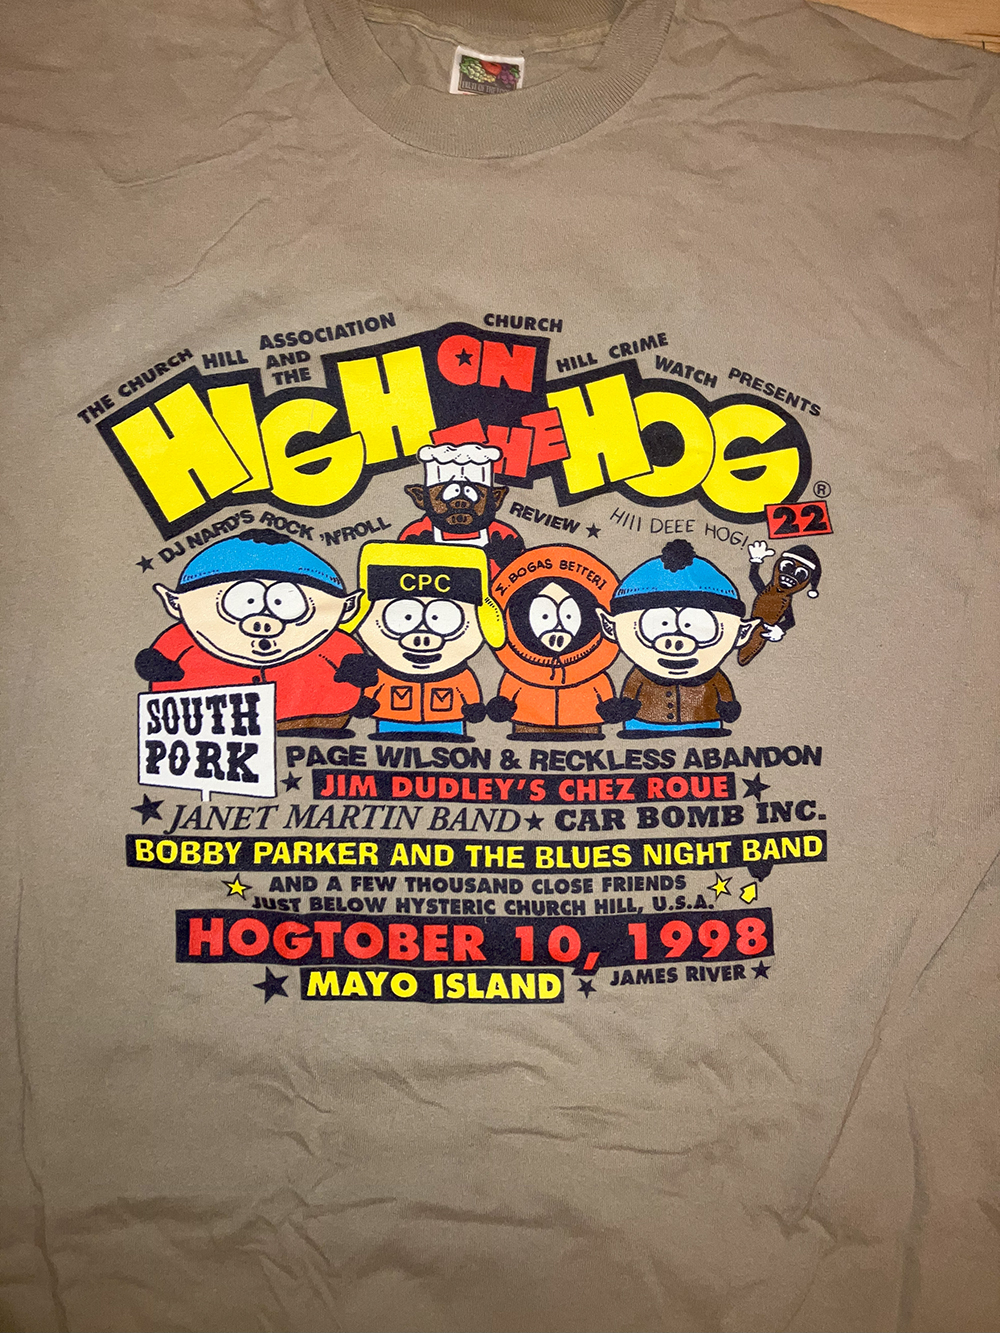 vintage bootleg 1998 south park t-shirt high on the hog page wilson jim dudley bobby parker james river mayo island